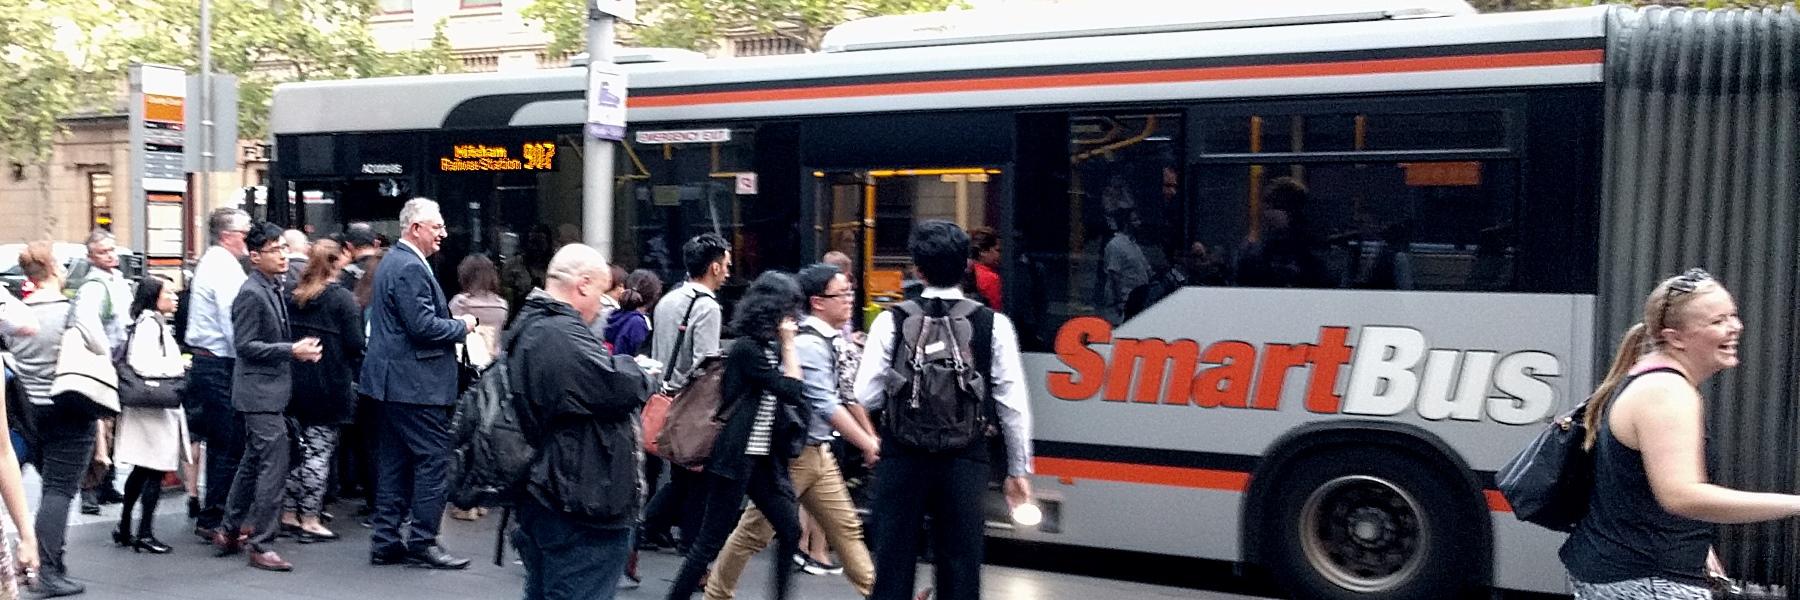 Crowded Smartbus on Lonsdale Street